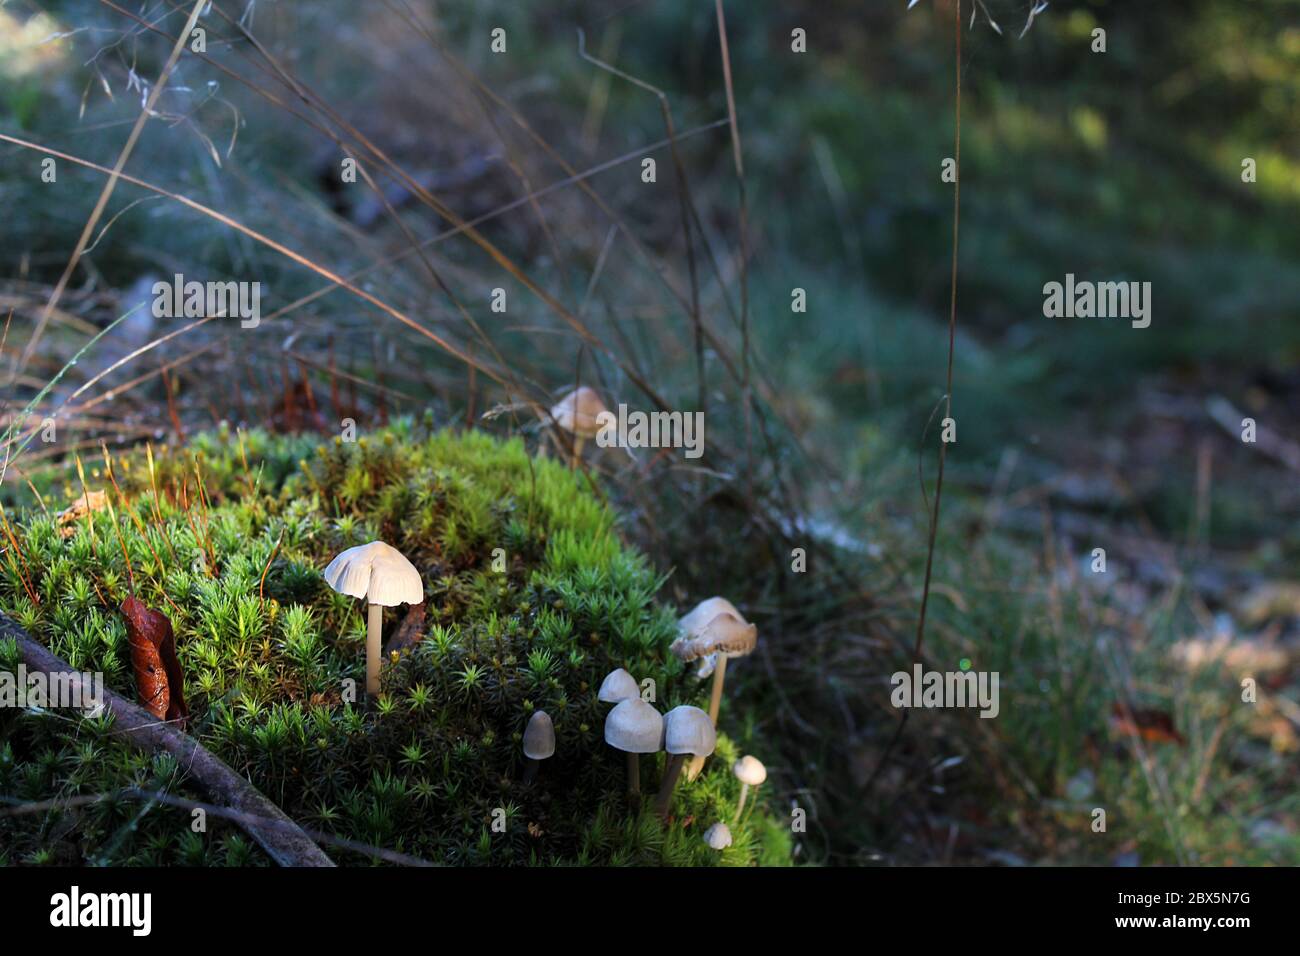 Tiny mushrooms growing on moss in the forest. Stock Photo